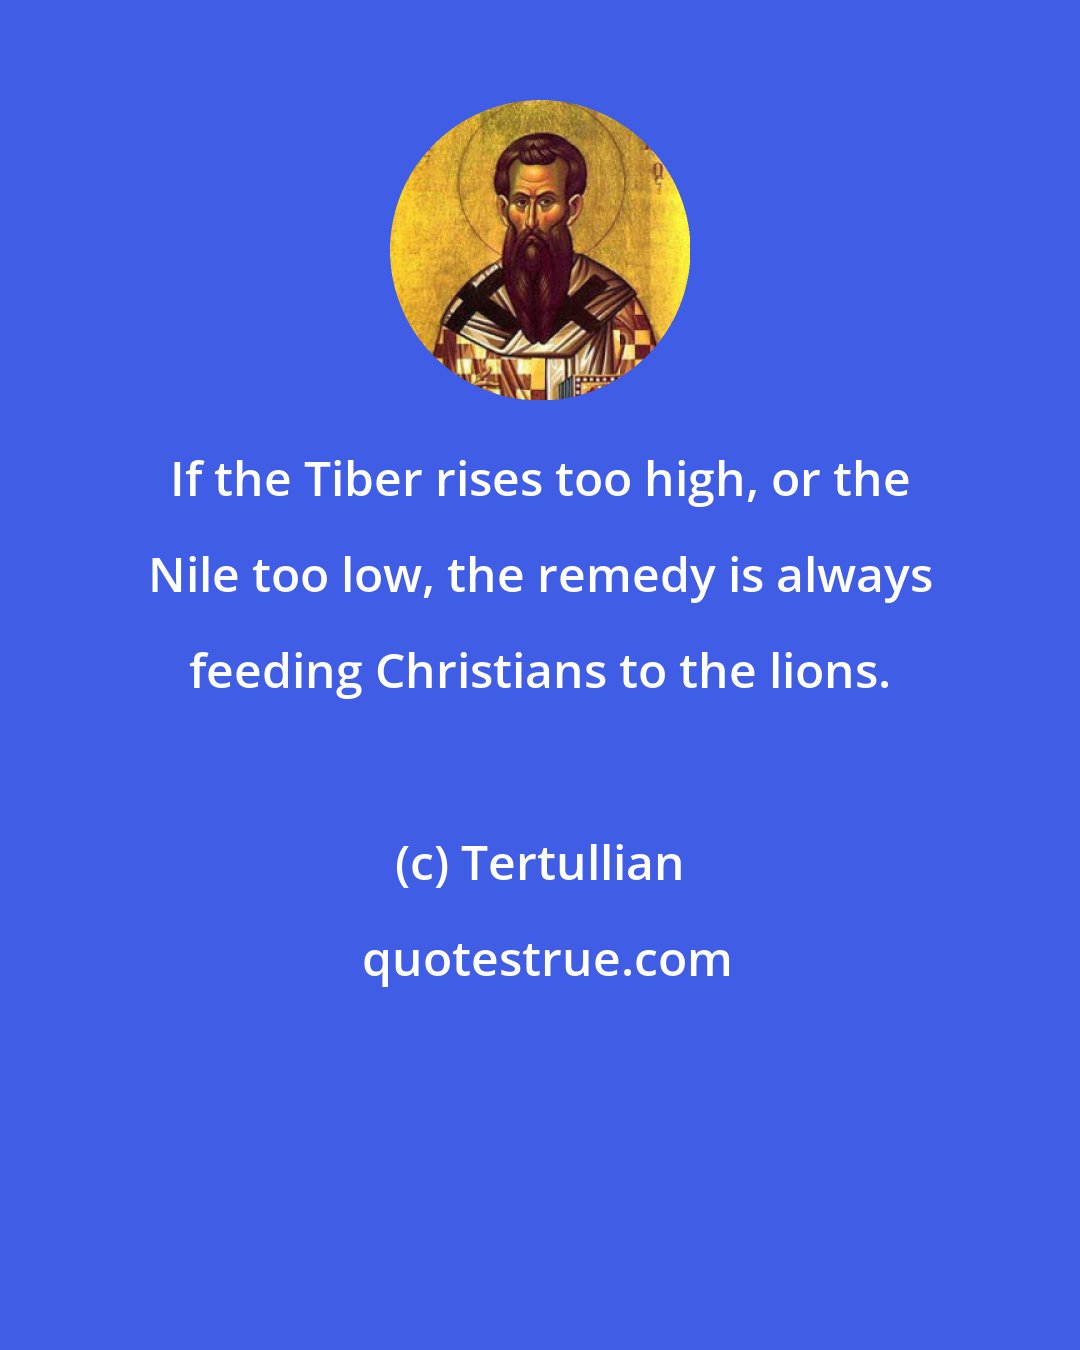 Tertullian: If the Tiber rises too high, or the Nile too low, the remedy is always feeding Christians to the lions.